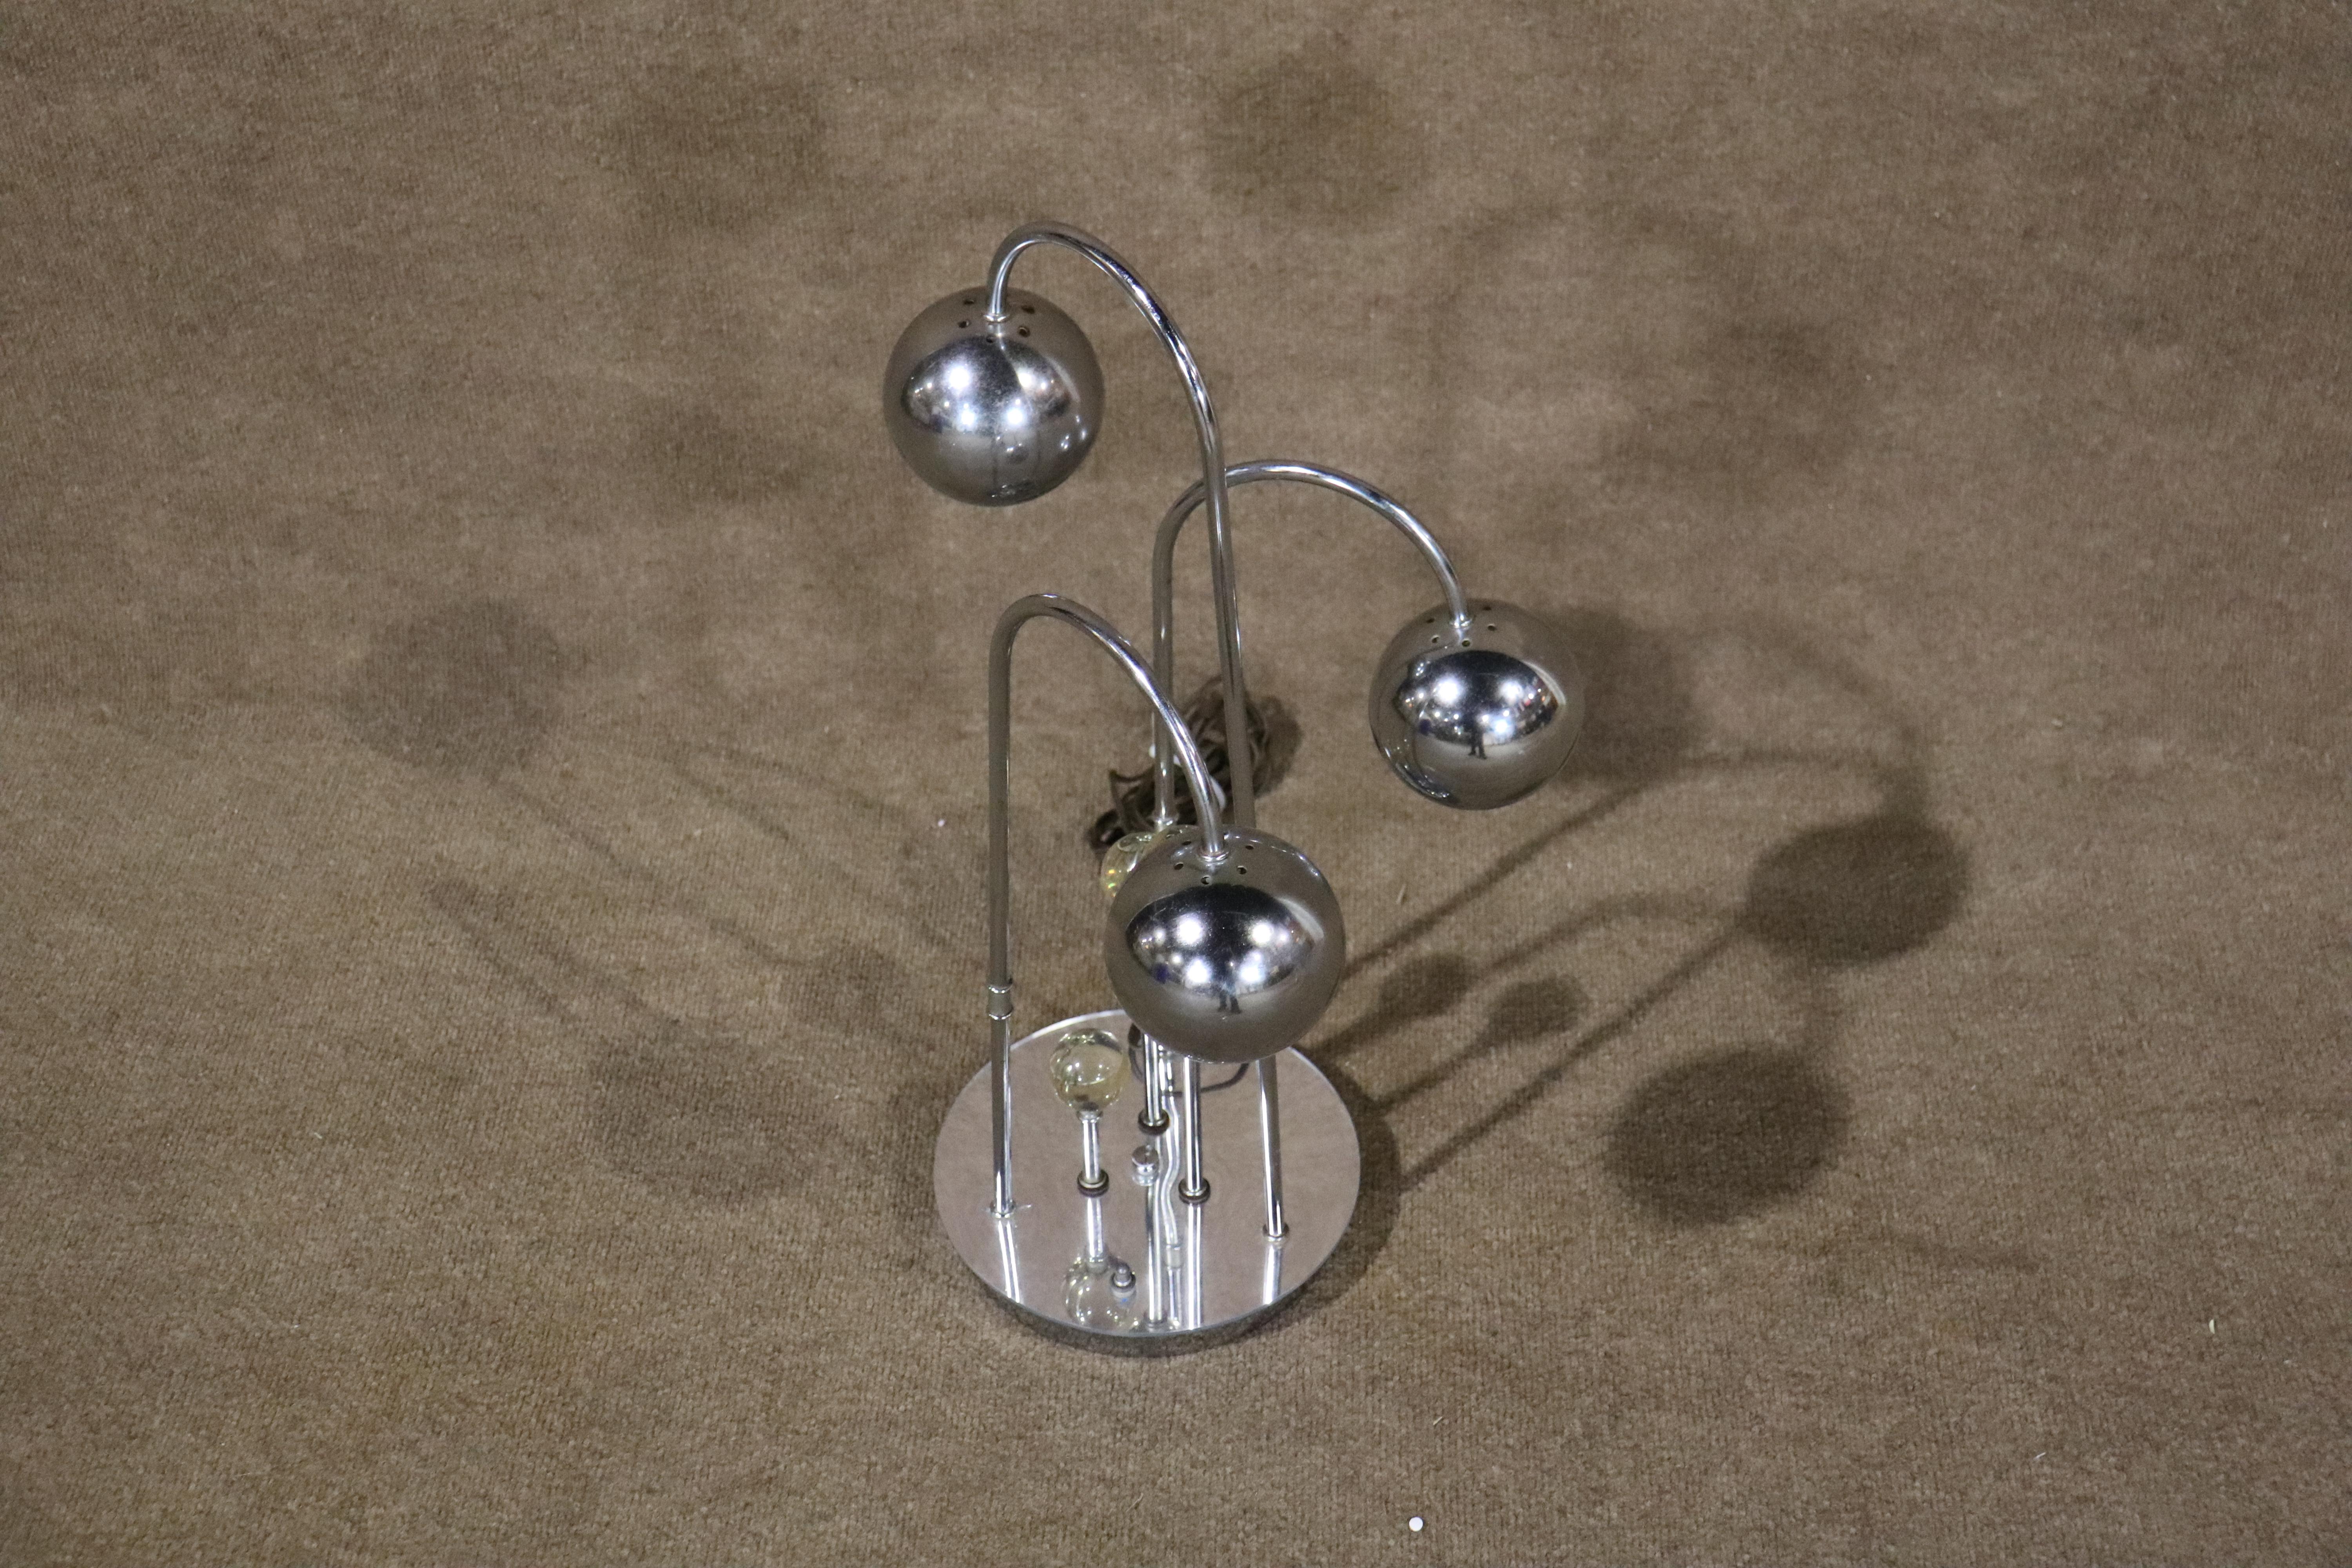 Table lamp in polished chrome with movable arms. Each lamp has a round shade with single socket.
Please confirm location NY or NJ